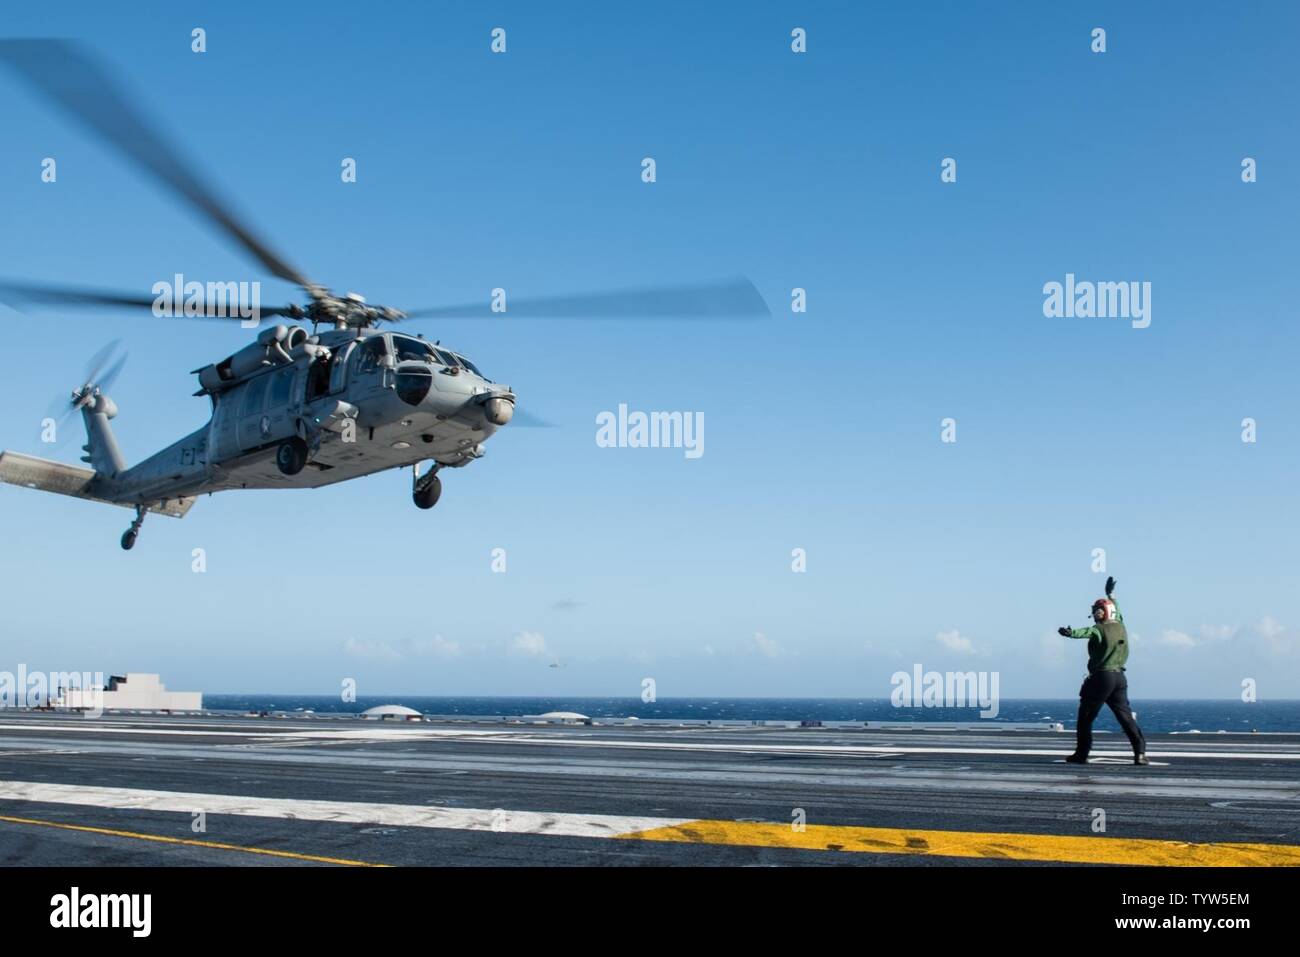 PACIFIC OCEAN (Nov. 30, 2016) Petty Officer 3rd Class Andrew Bate, from Boise, Idaho, directs an MH-60S Sea Hawk assigned to the Chargers of Helicopter Sea Combat Squadron (HSC) 14 to land on USS John C. Stennis' (CVN 74) flight deck. John C. Stennis is underway to conduct routine training and participate in National Pearl Harbor Remembrance Day events in Hawaii. Stock Photo